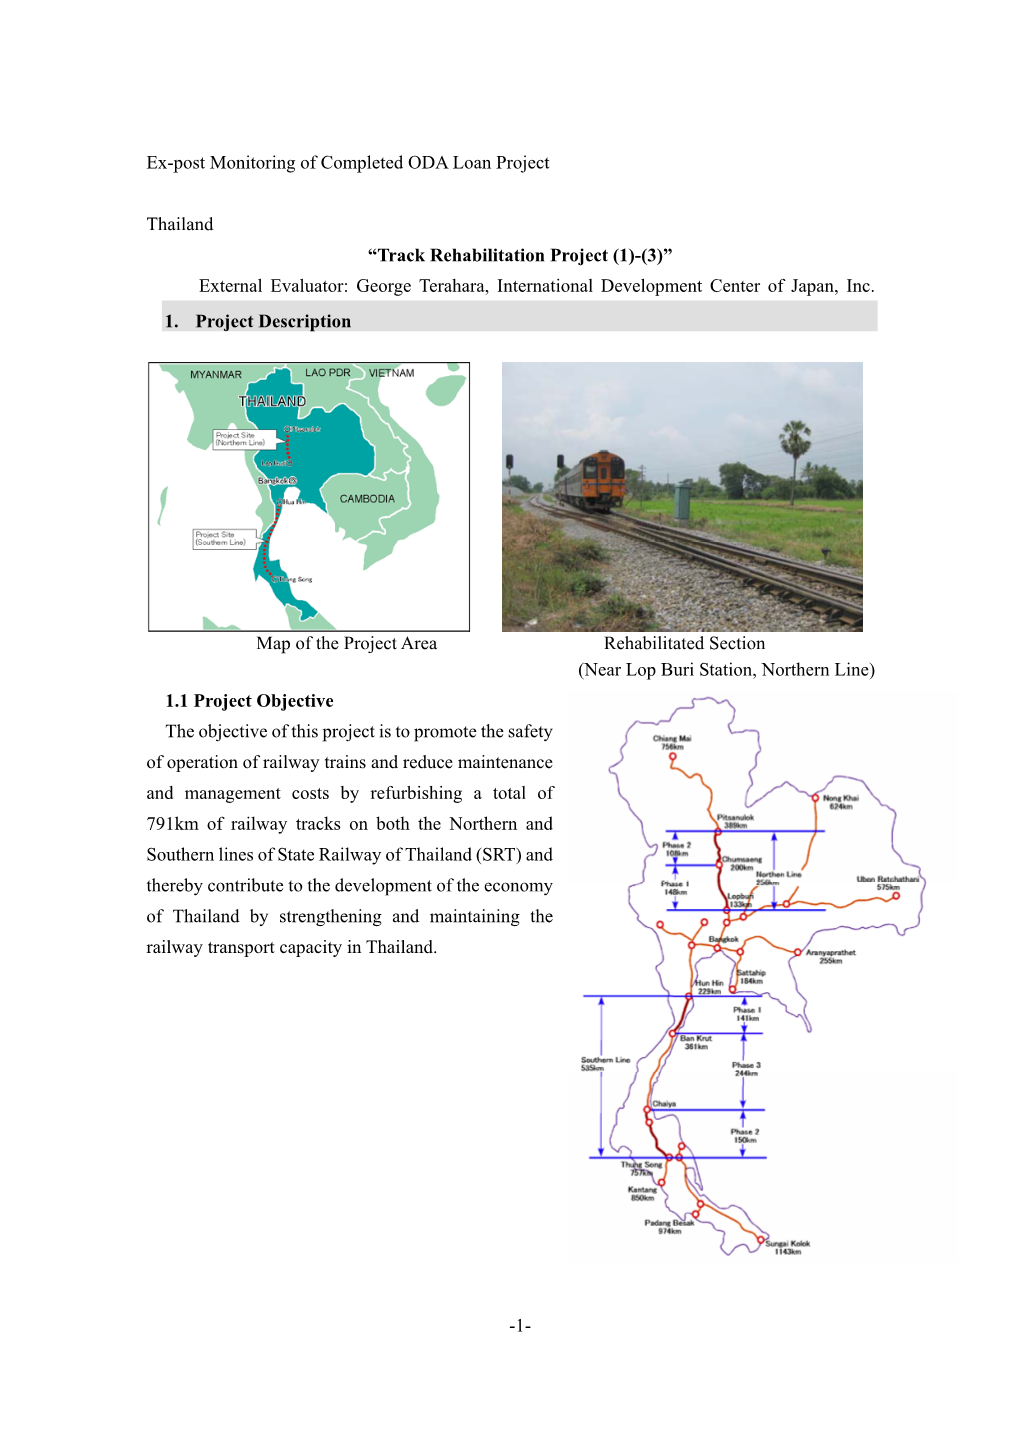 1- Ex-Post Monitoring of Completed ODA Loan Project Thailand “Track Rehabilitation Project (1)-(3)” External Evaluator